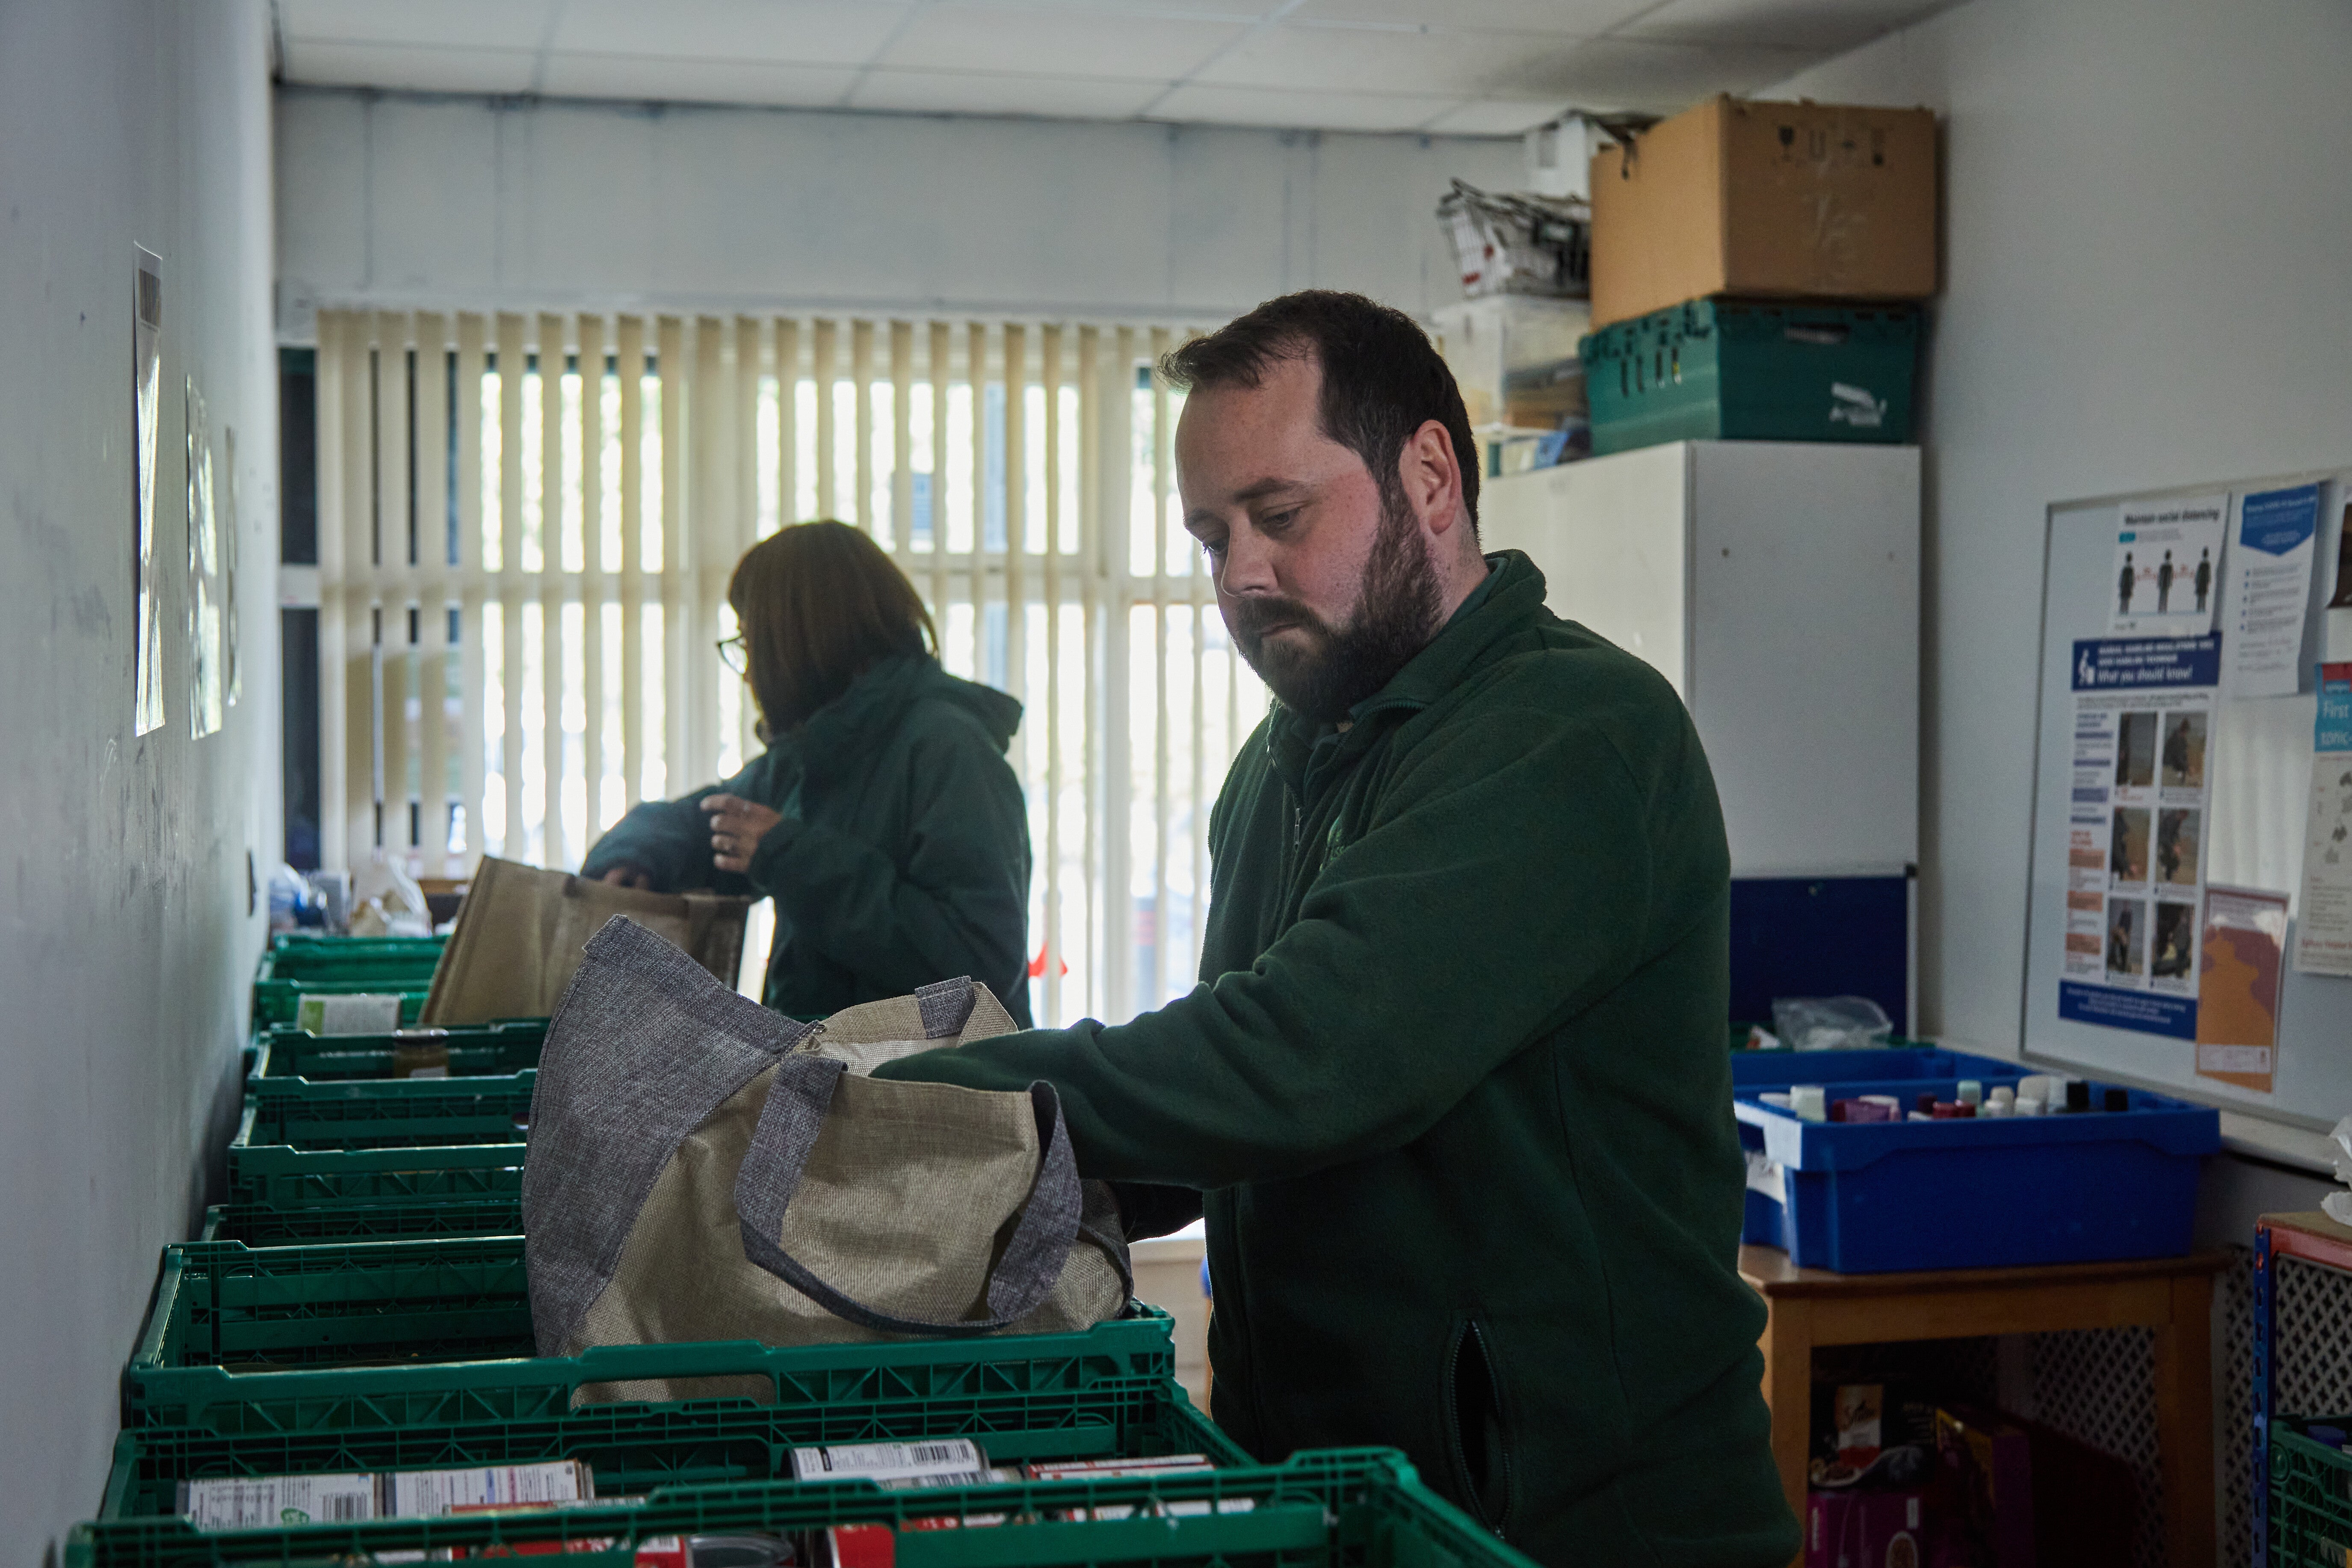 In the last month, Trussell Trust Kingston has handed out 558 parcels to 784 adults and 357 children